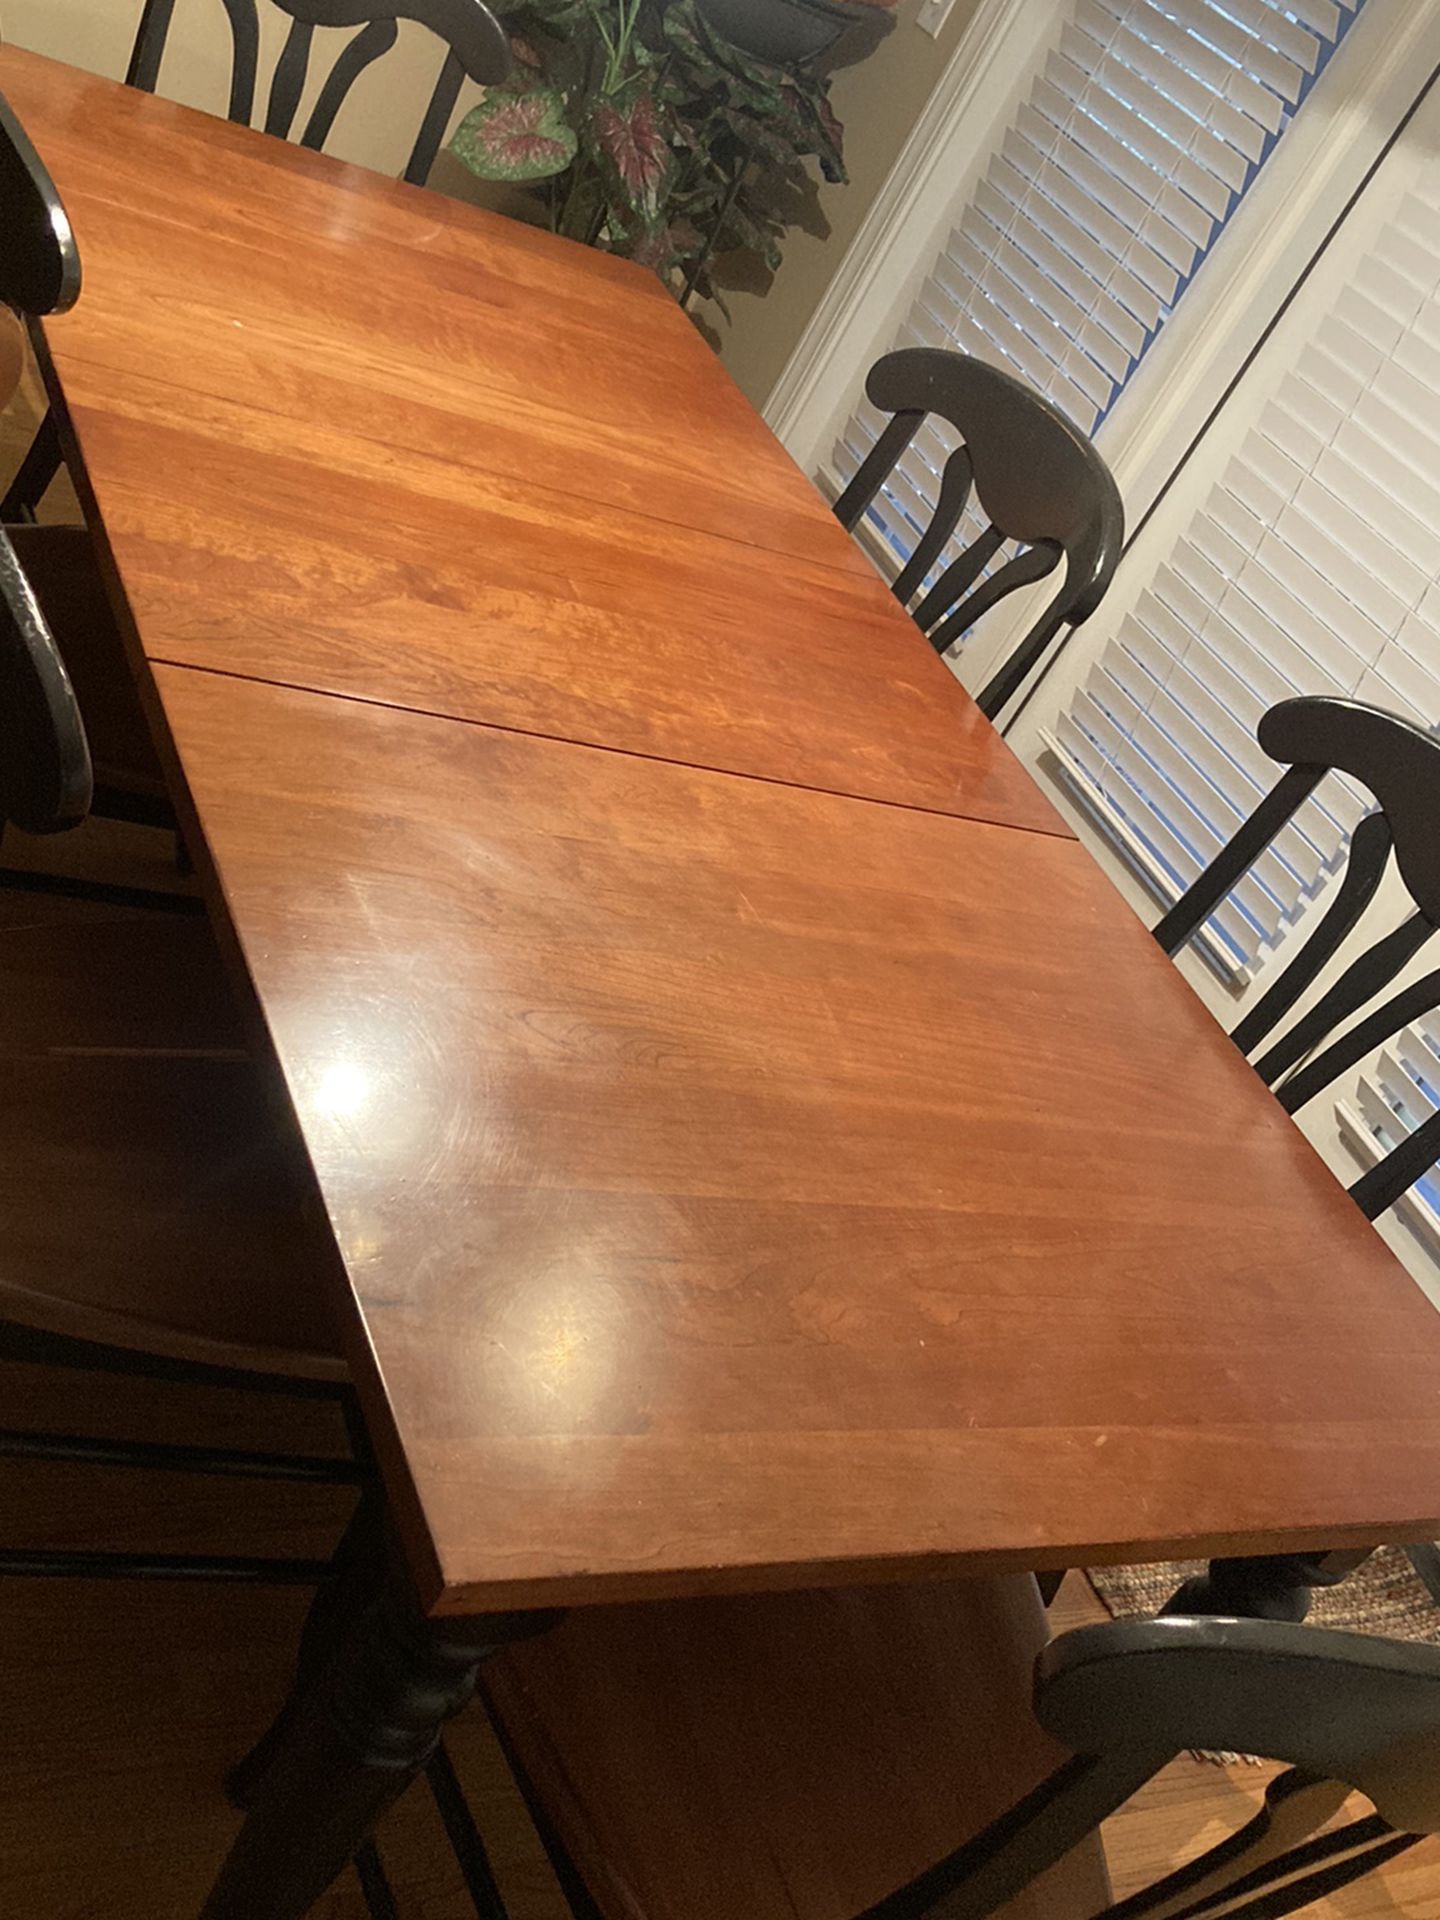 Formal Dining Room Table, Chairs, Bar Height Chairs